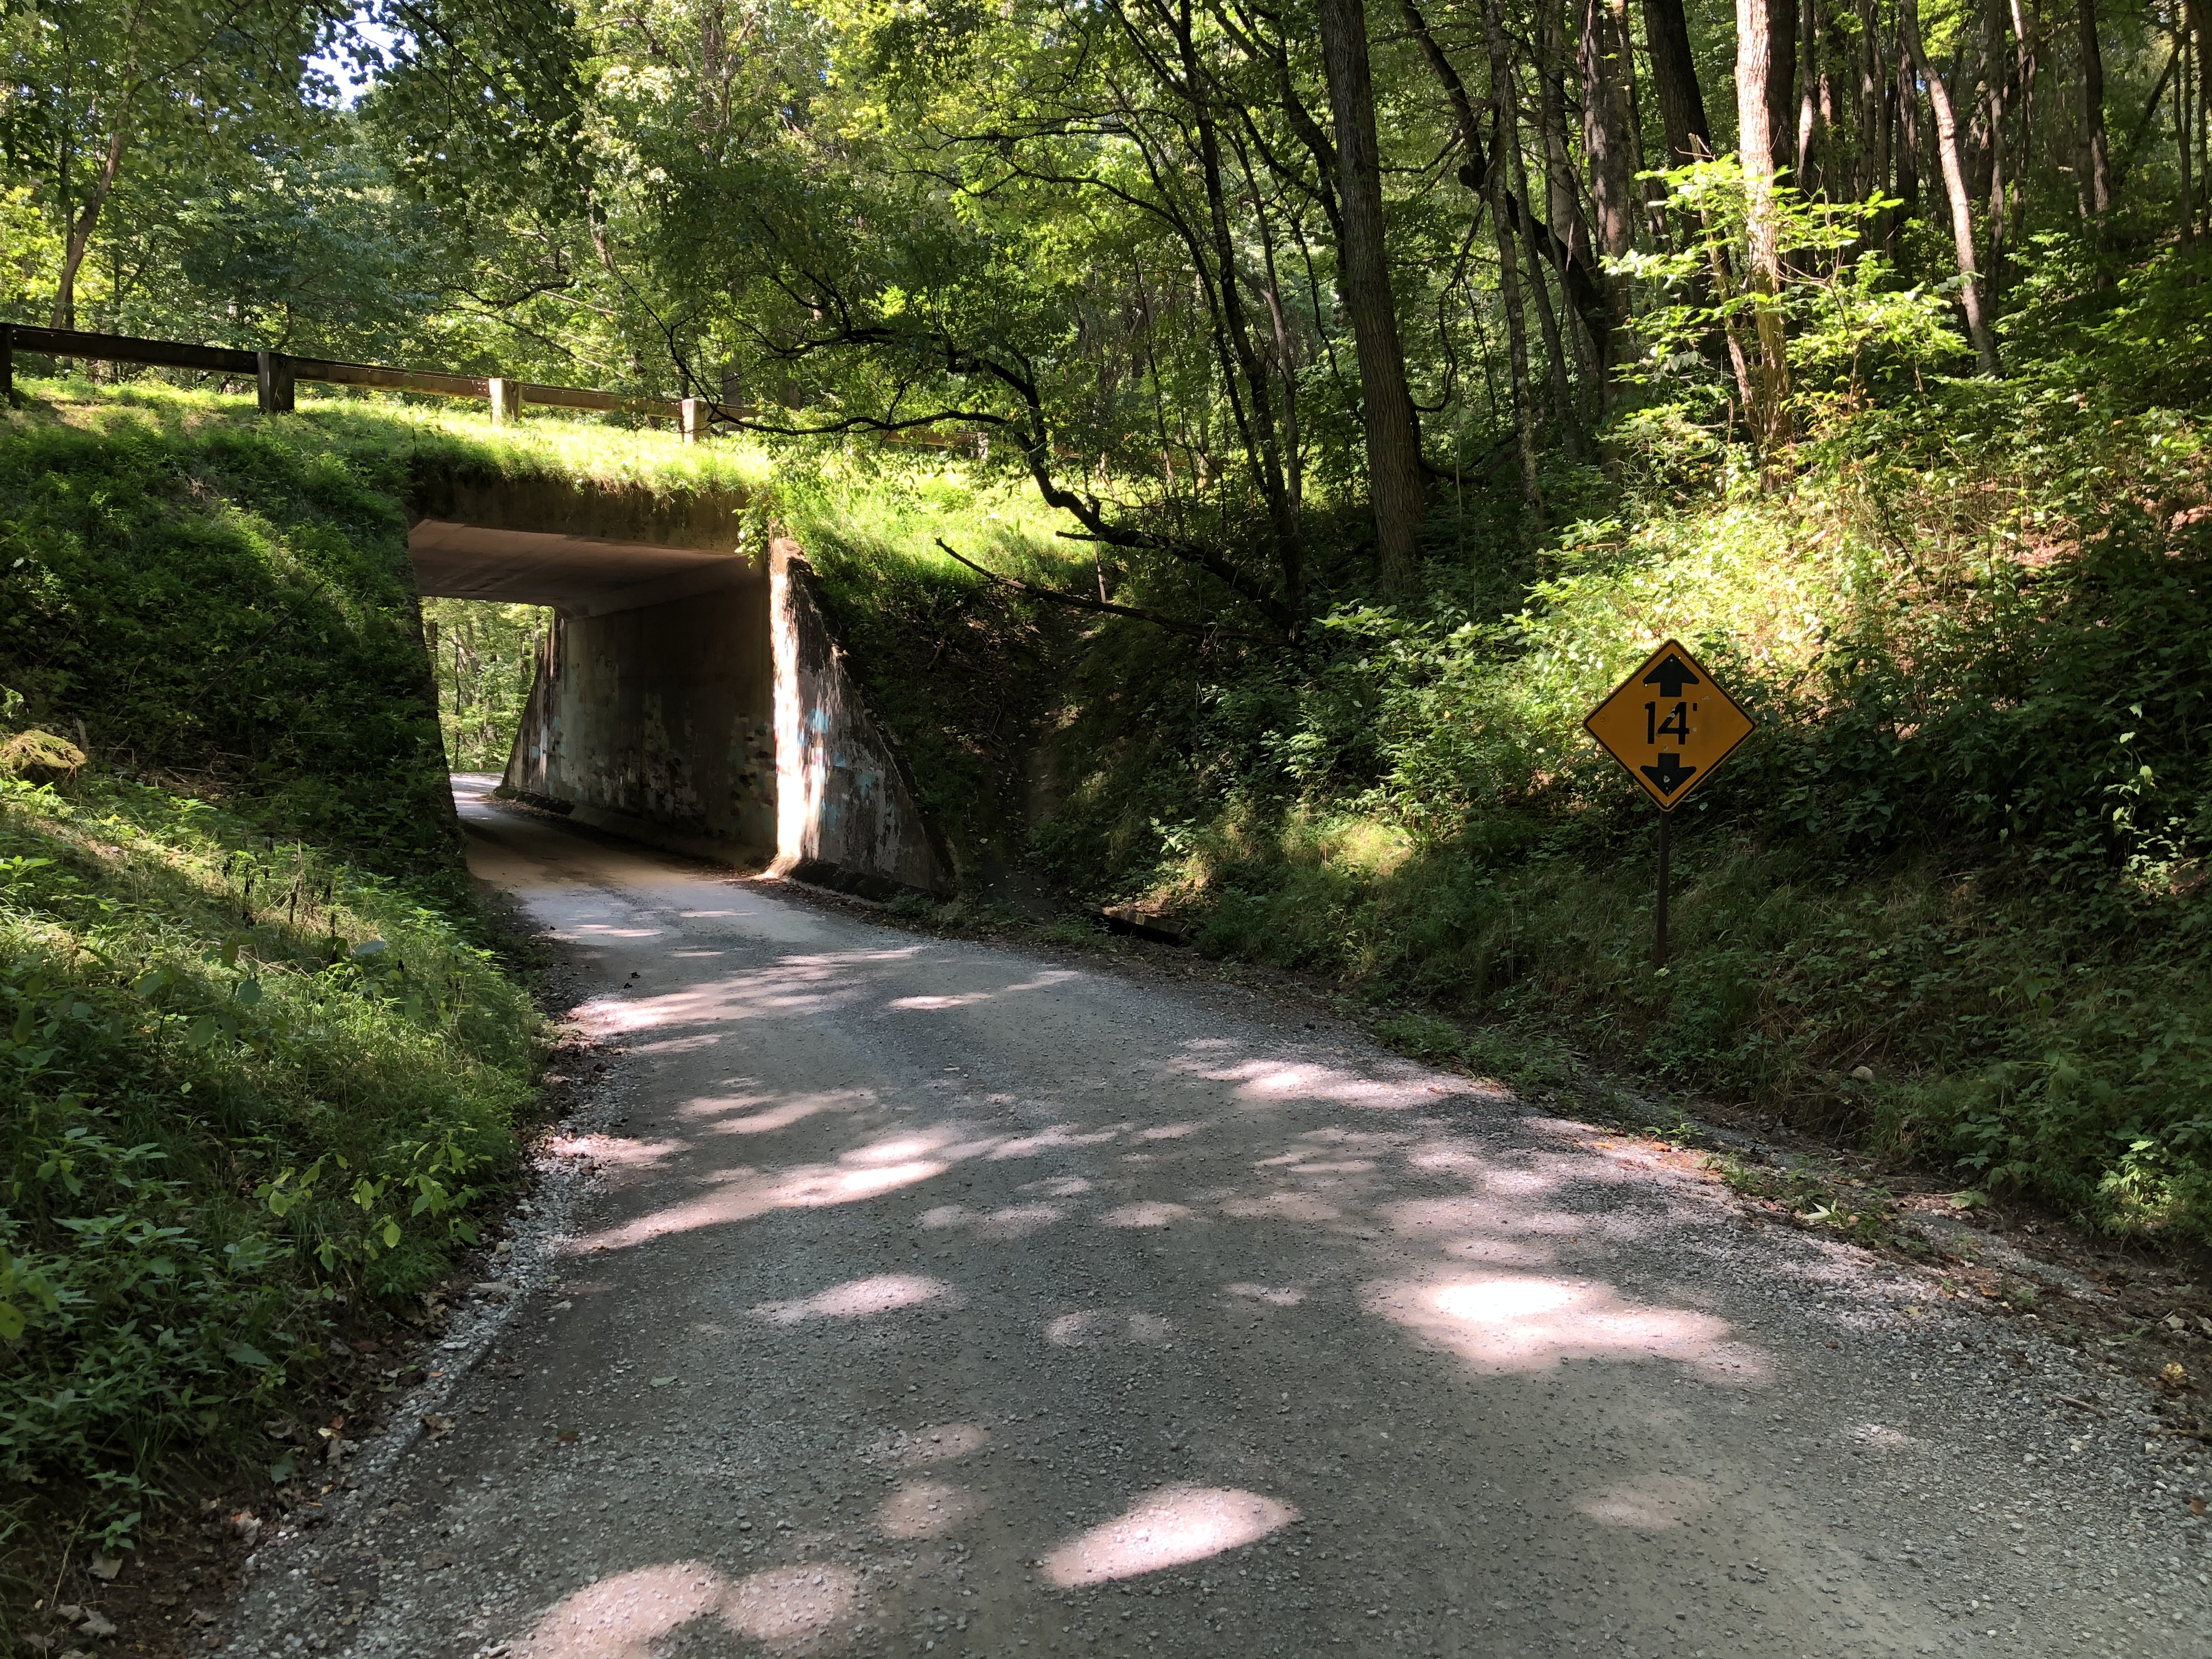 The well-maintained gravel entry road passes under the Parkway and a portion of the Mountains-To-Sea trail runs along the road.